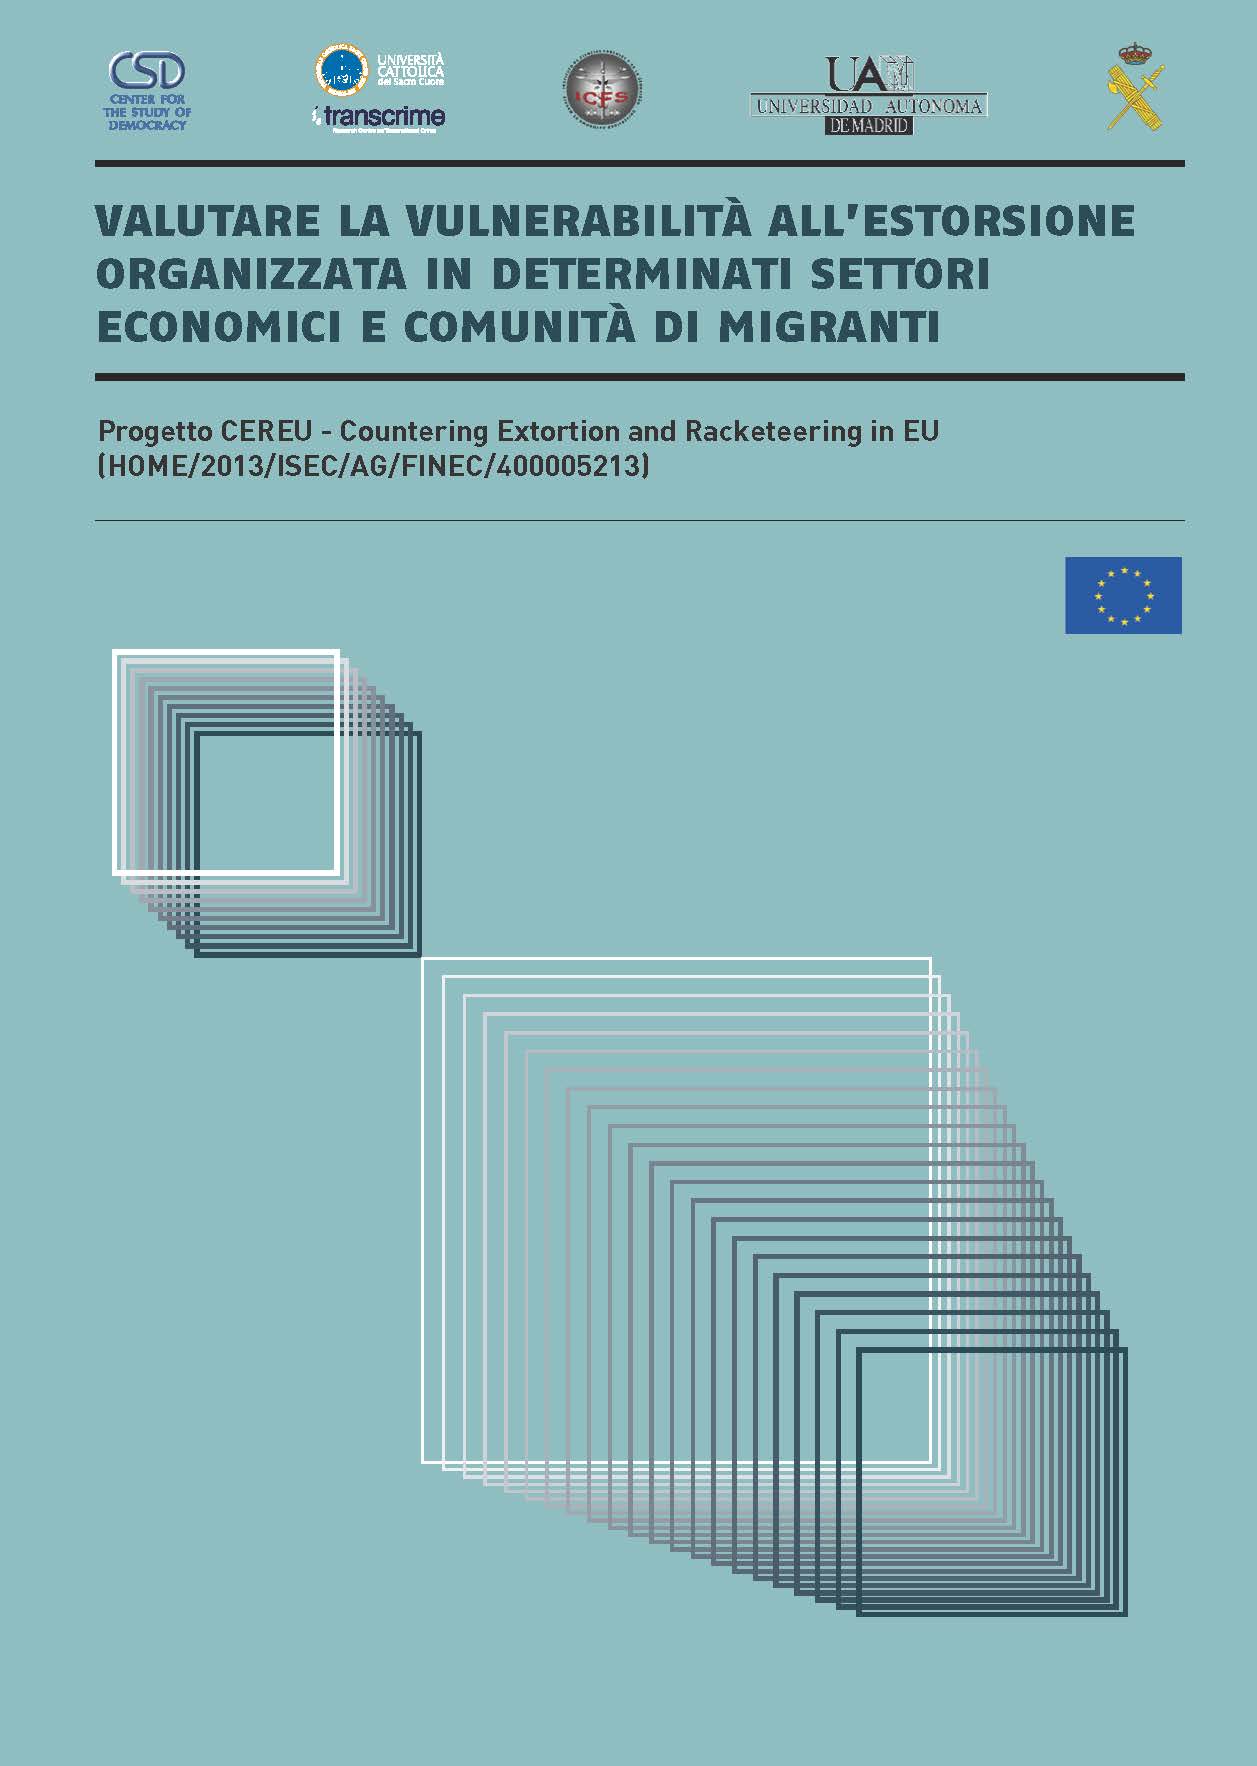 CSD Policy Brief No. 63: ASSESSING THE VULNERABILITY EXTORTION ORGANIZED IN CERTAIN SECTORS AND ECONOMIC COMMUNITY OF MIGRANTS Cover Image